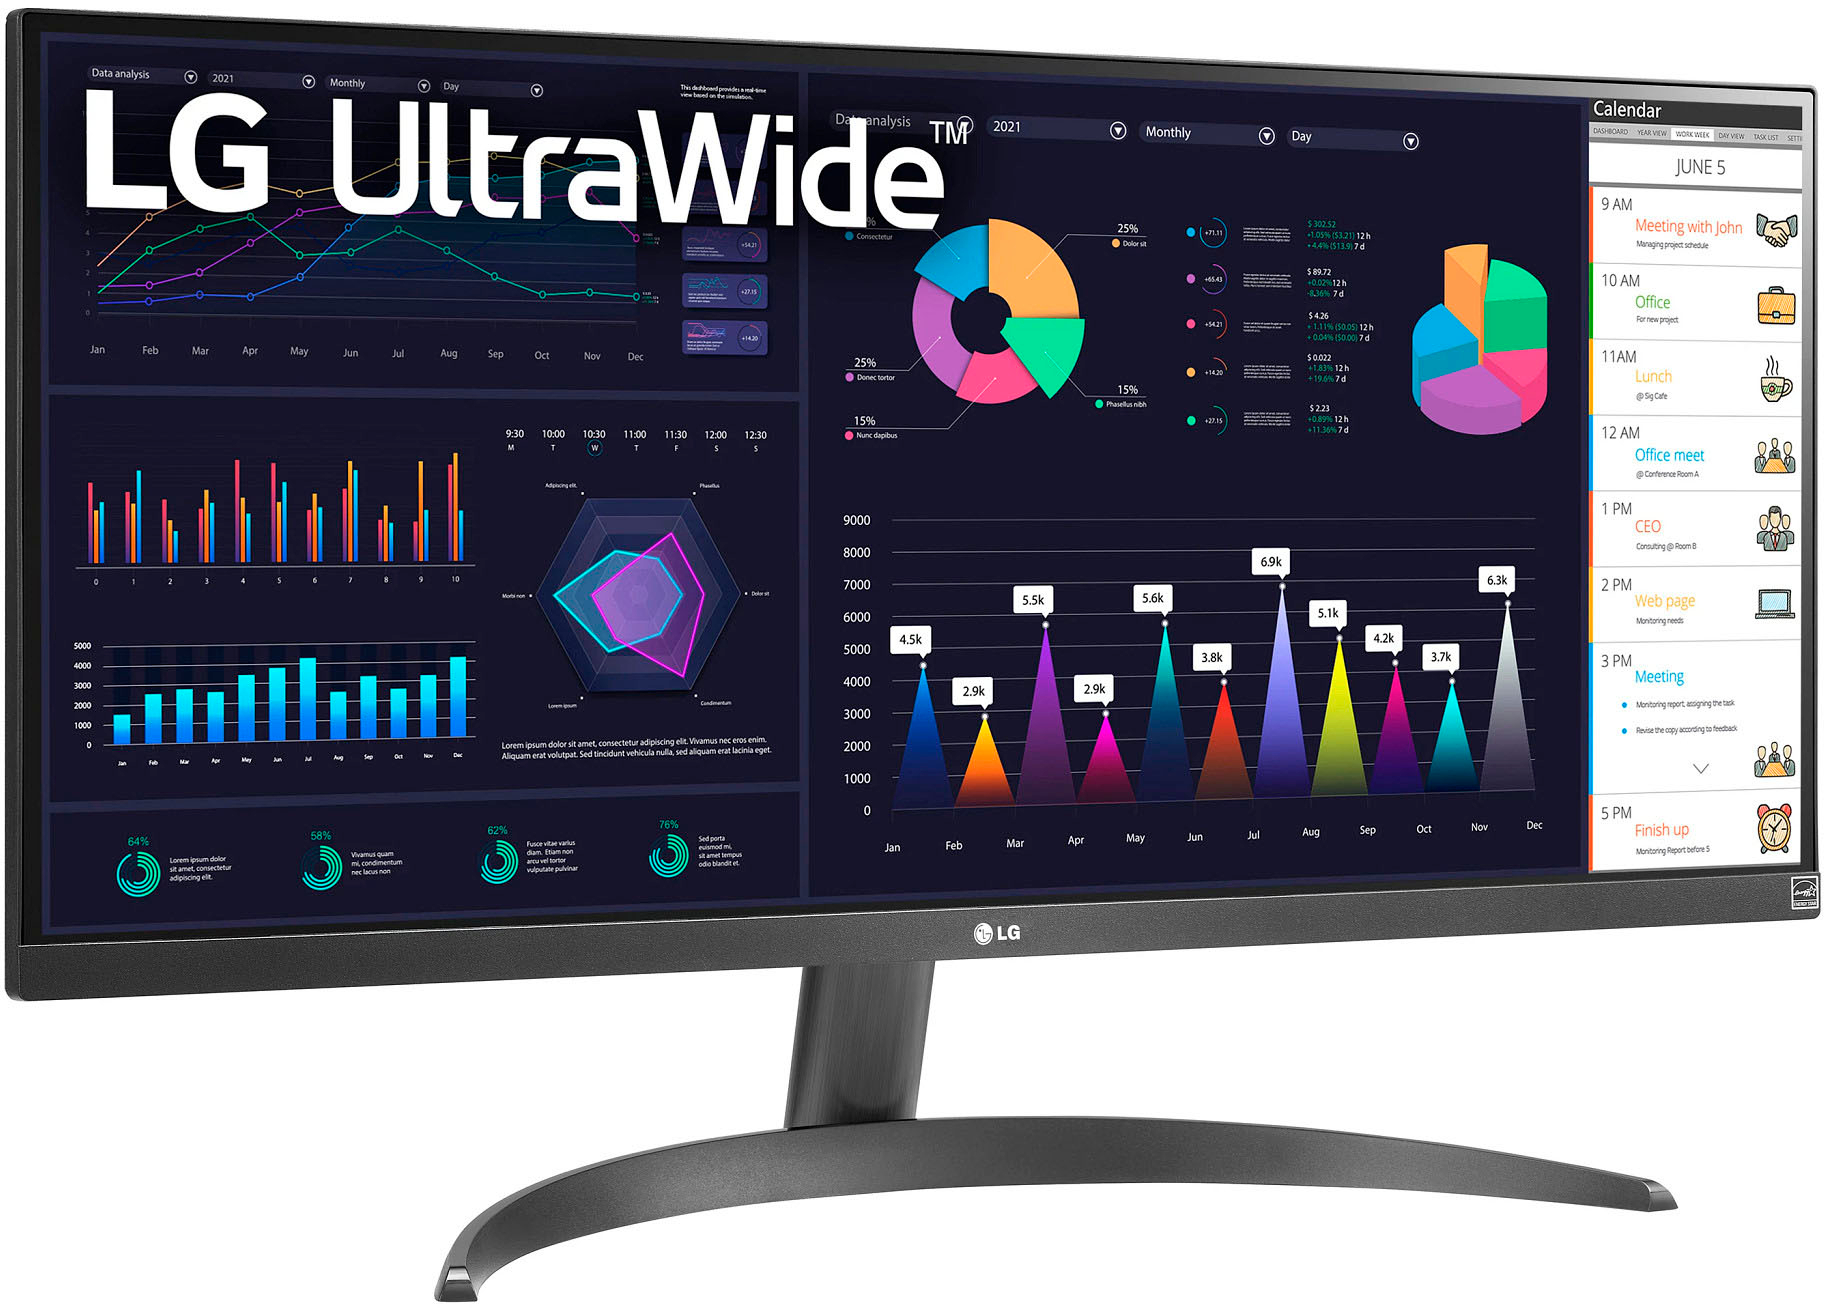 LG 29” IPS LED UltraWide FHD 100Hz AMD FreeSync Monitor with HDR 